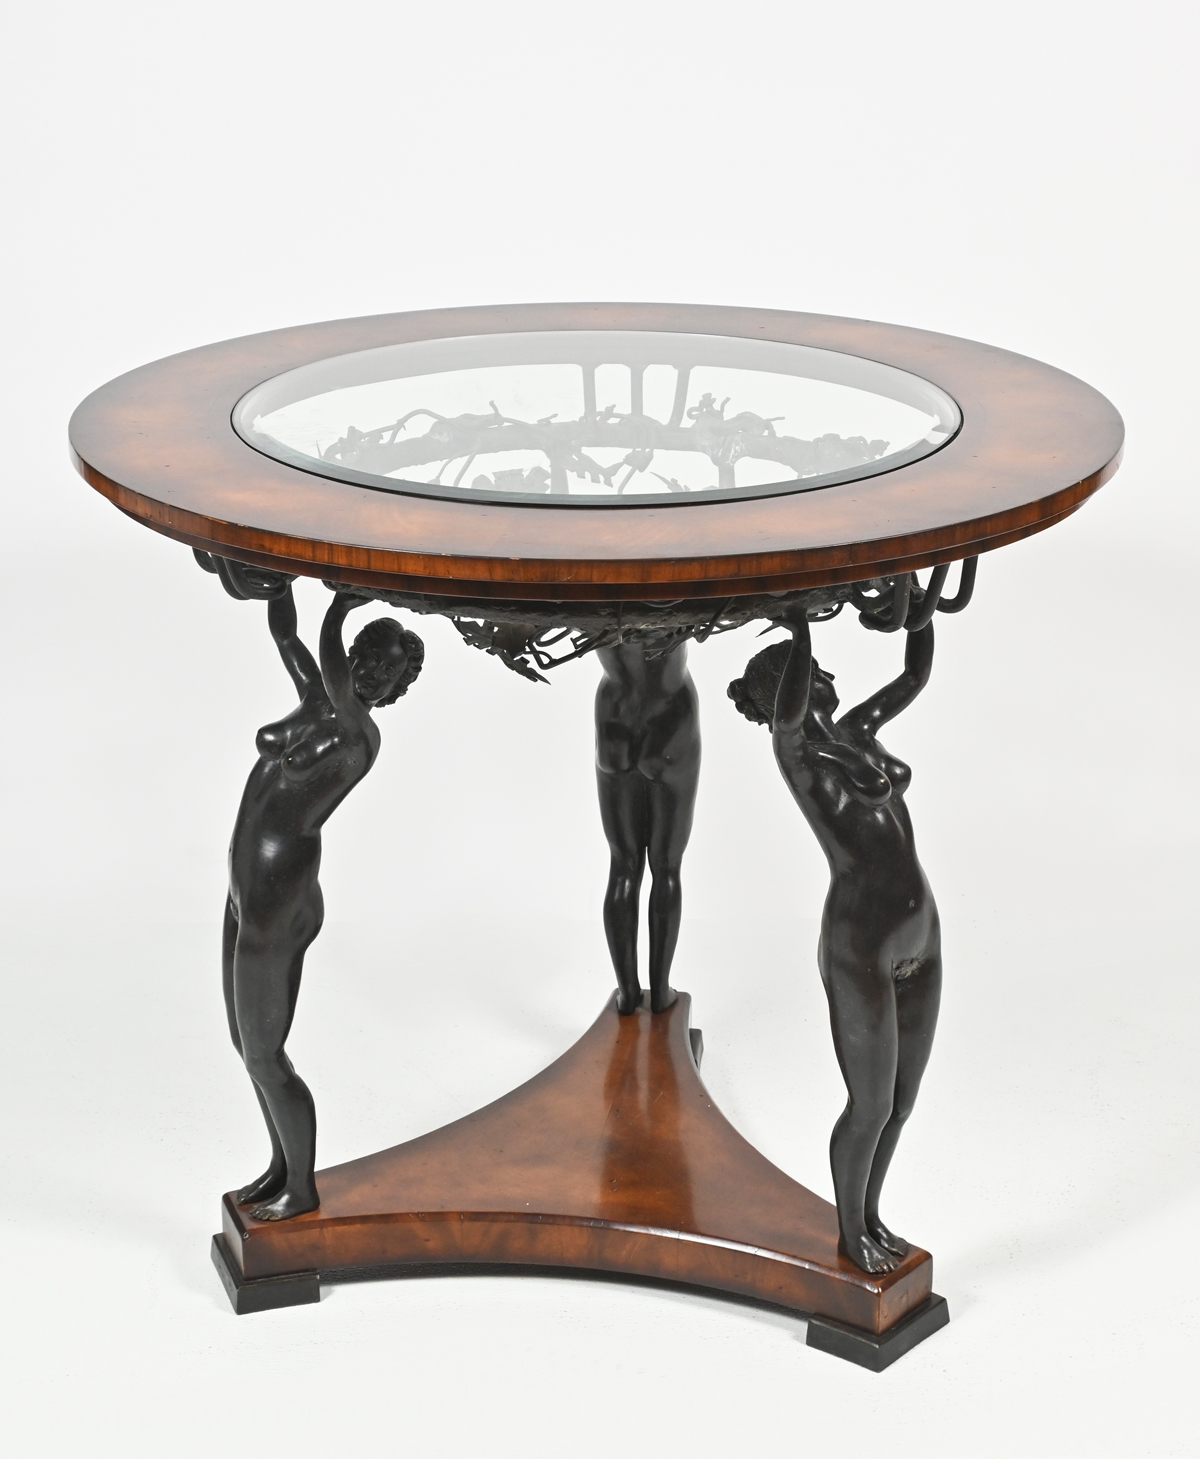 GLASS & WOOD TABLE WITH BRONZE